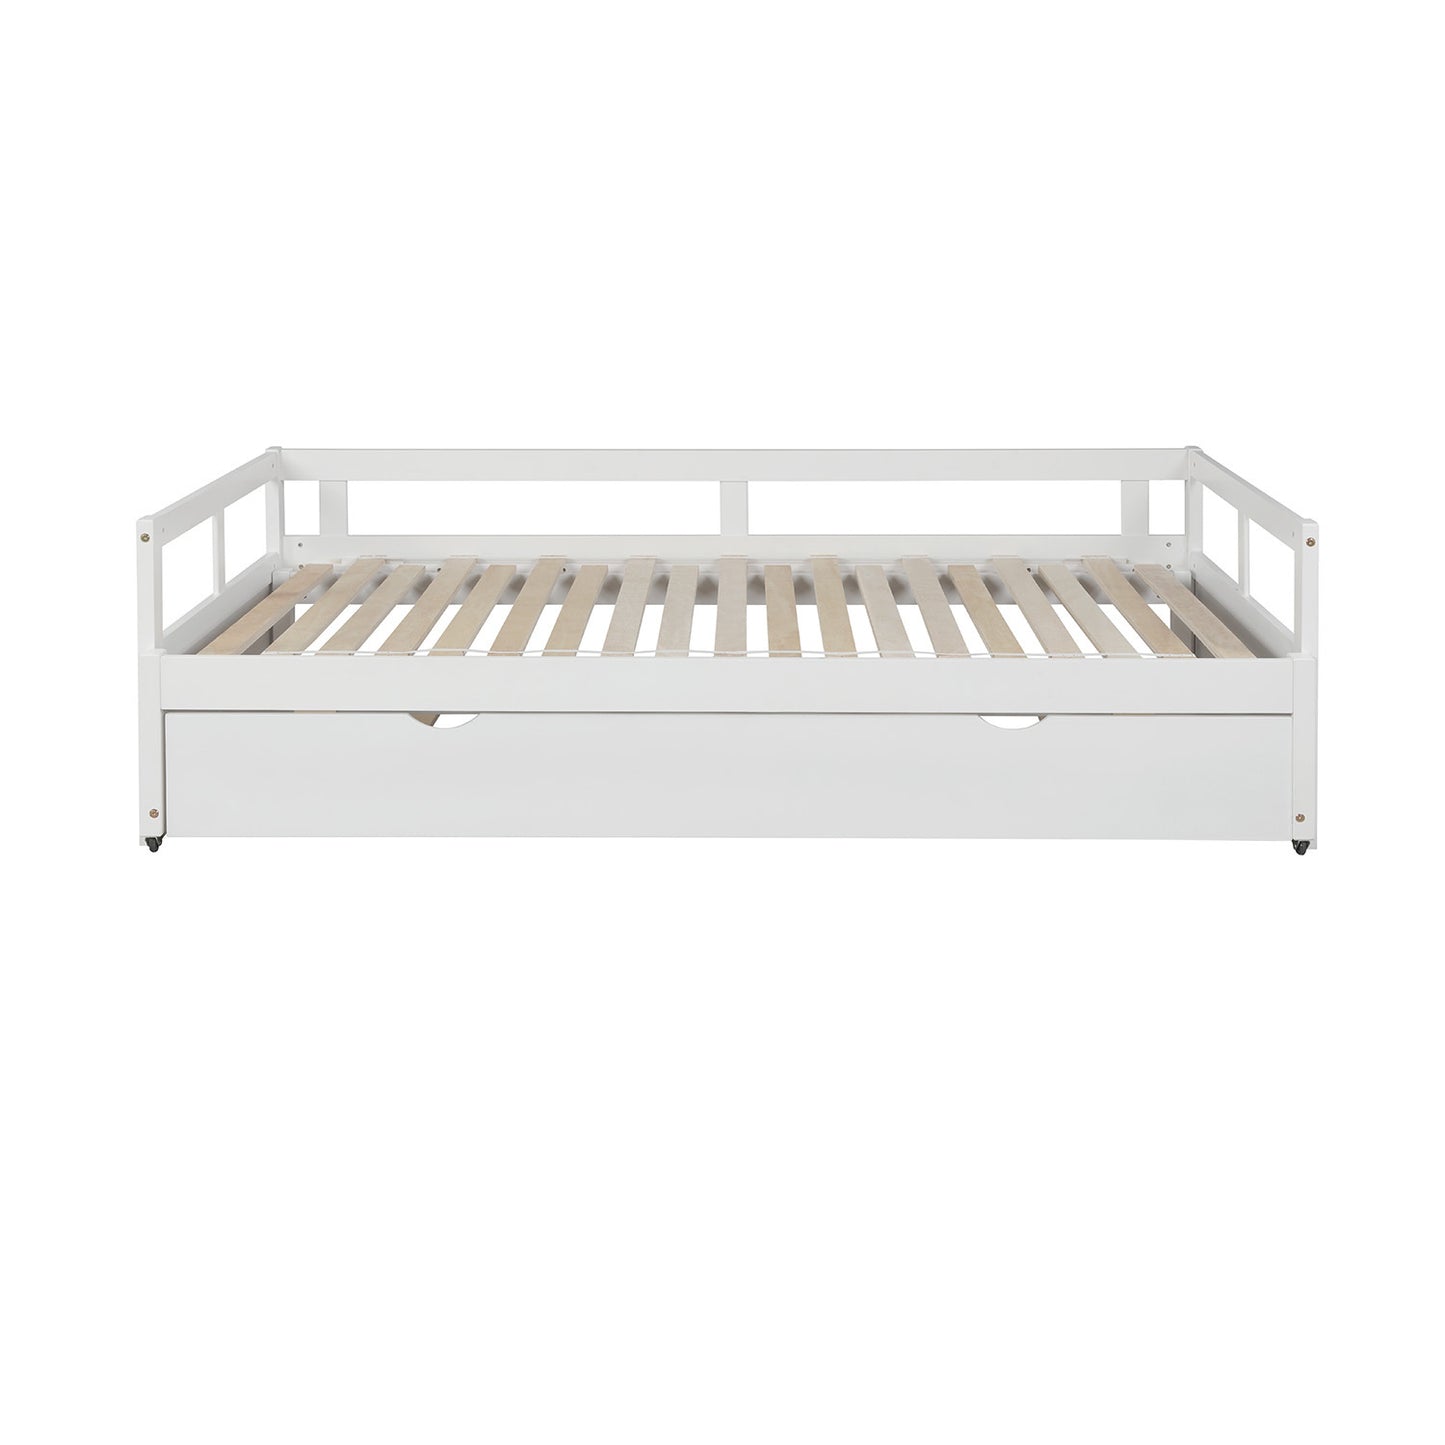 Extending Daybed with Trundle, Wooden Daybed with Trundle, White